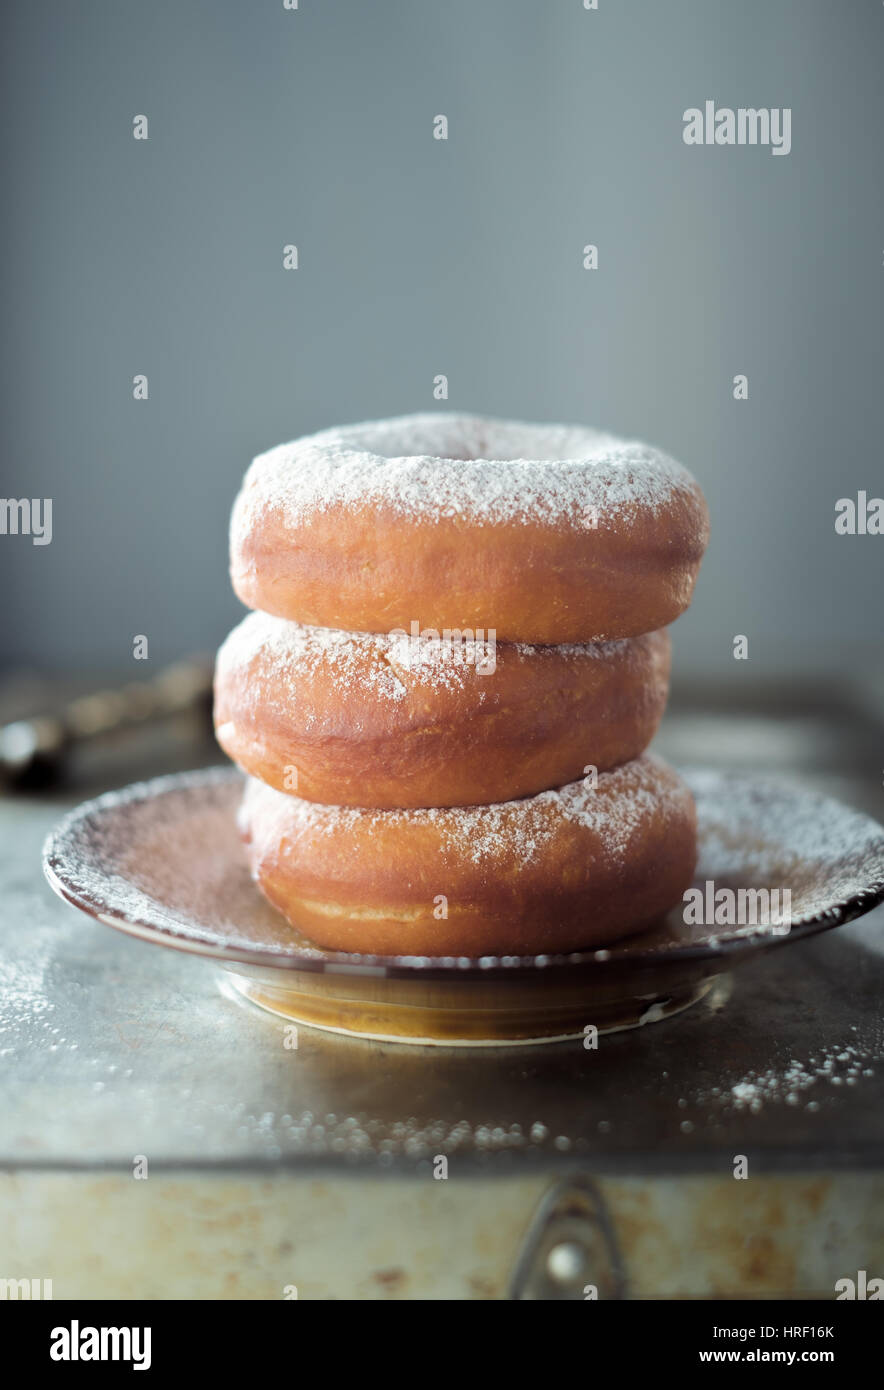 Delicious Donuts on plate stacked up against pastel background Stock Photo